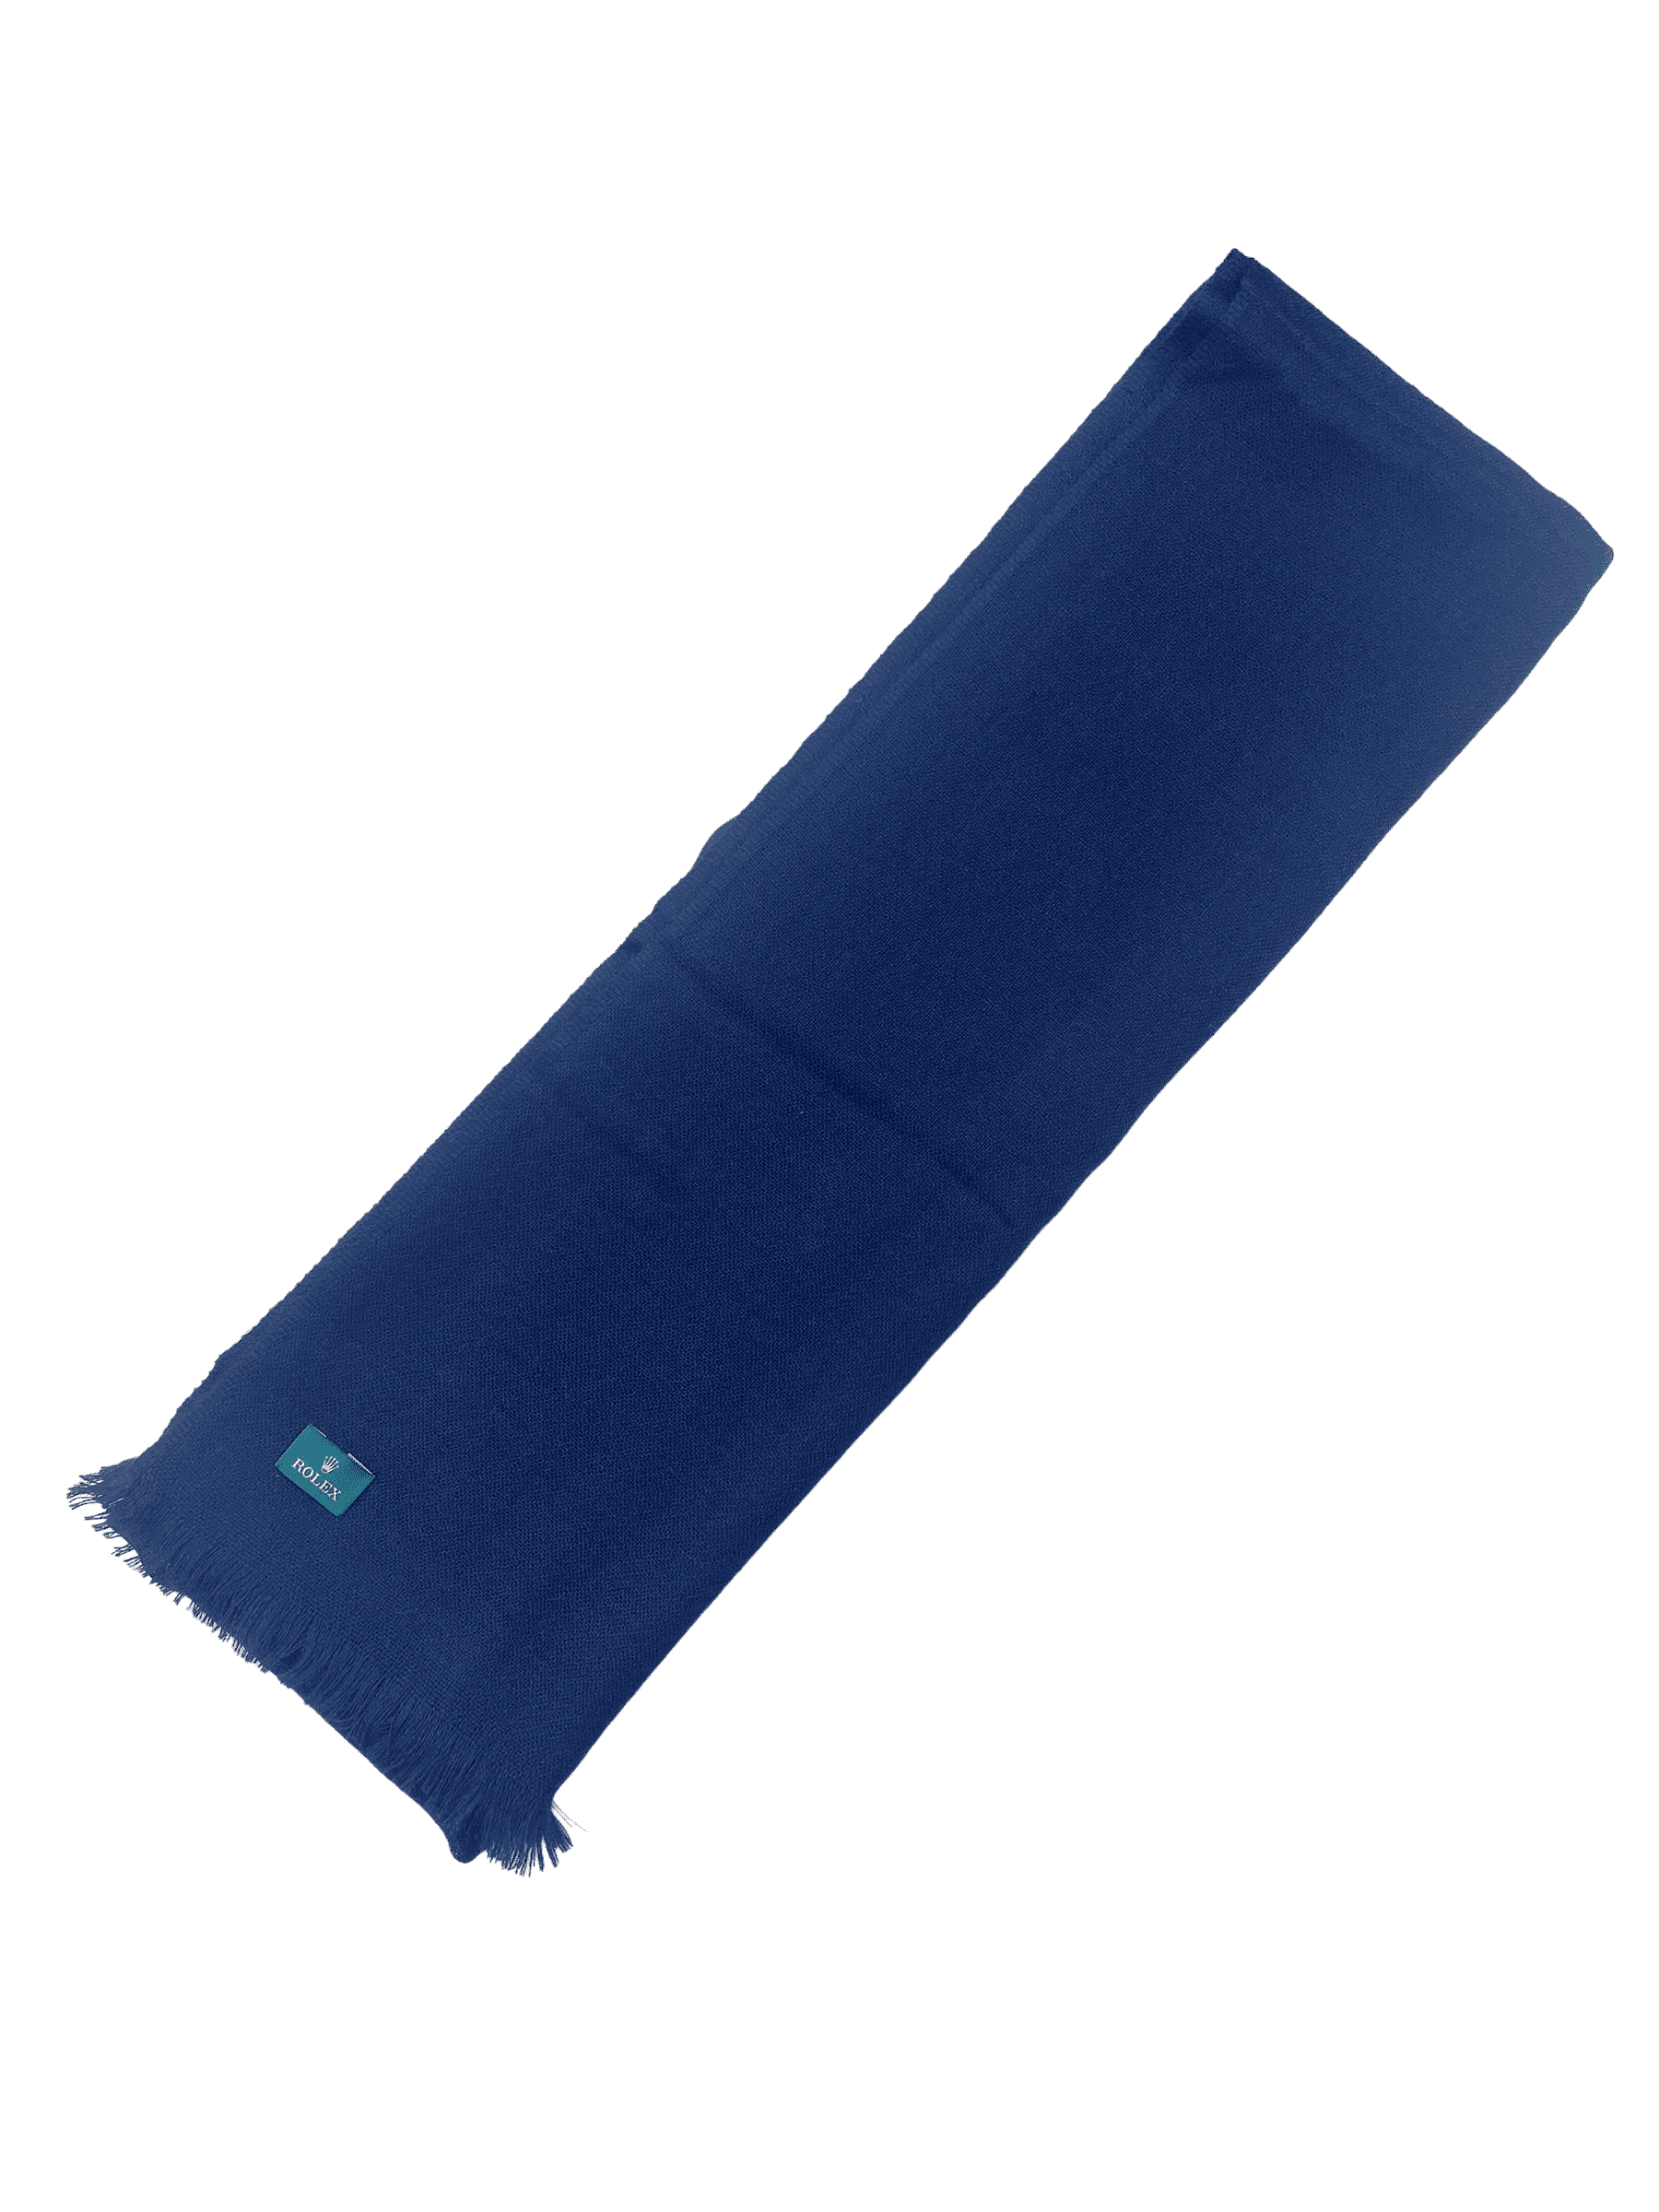 Rolex Navy Cashmere Scarf — Genuine Design Luxury Consignment Calgary, Alberta, Canada New and Pre-Owned Clothing, Shoes, Accessories.